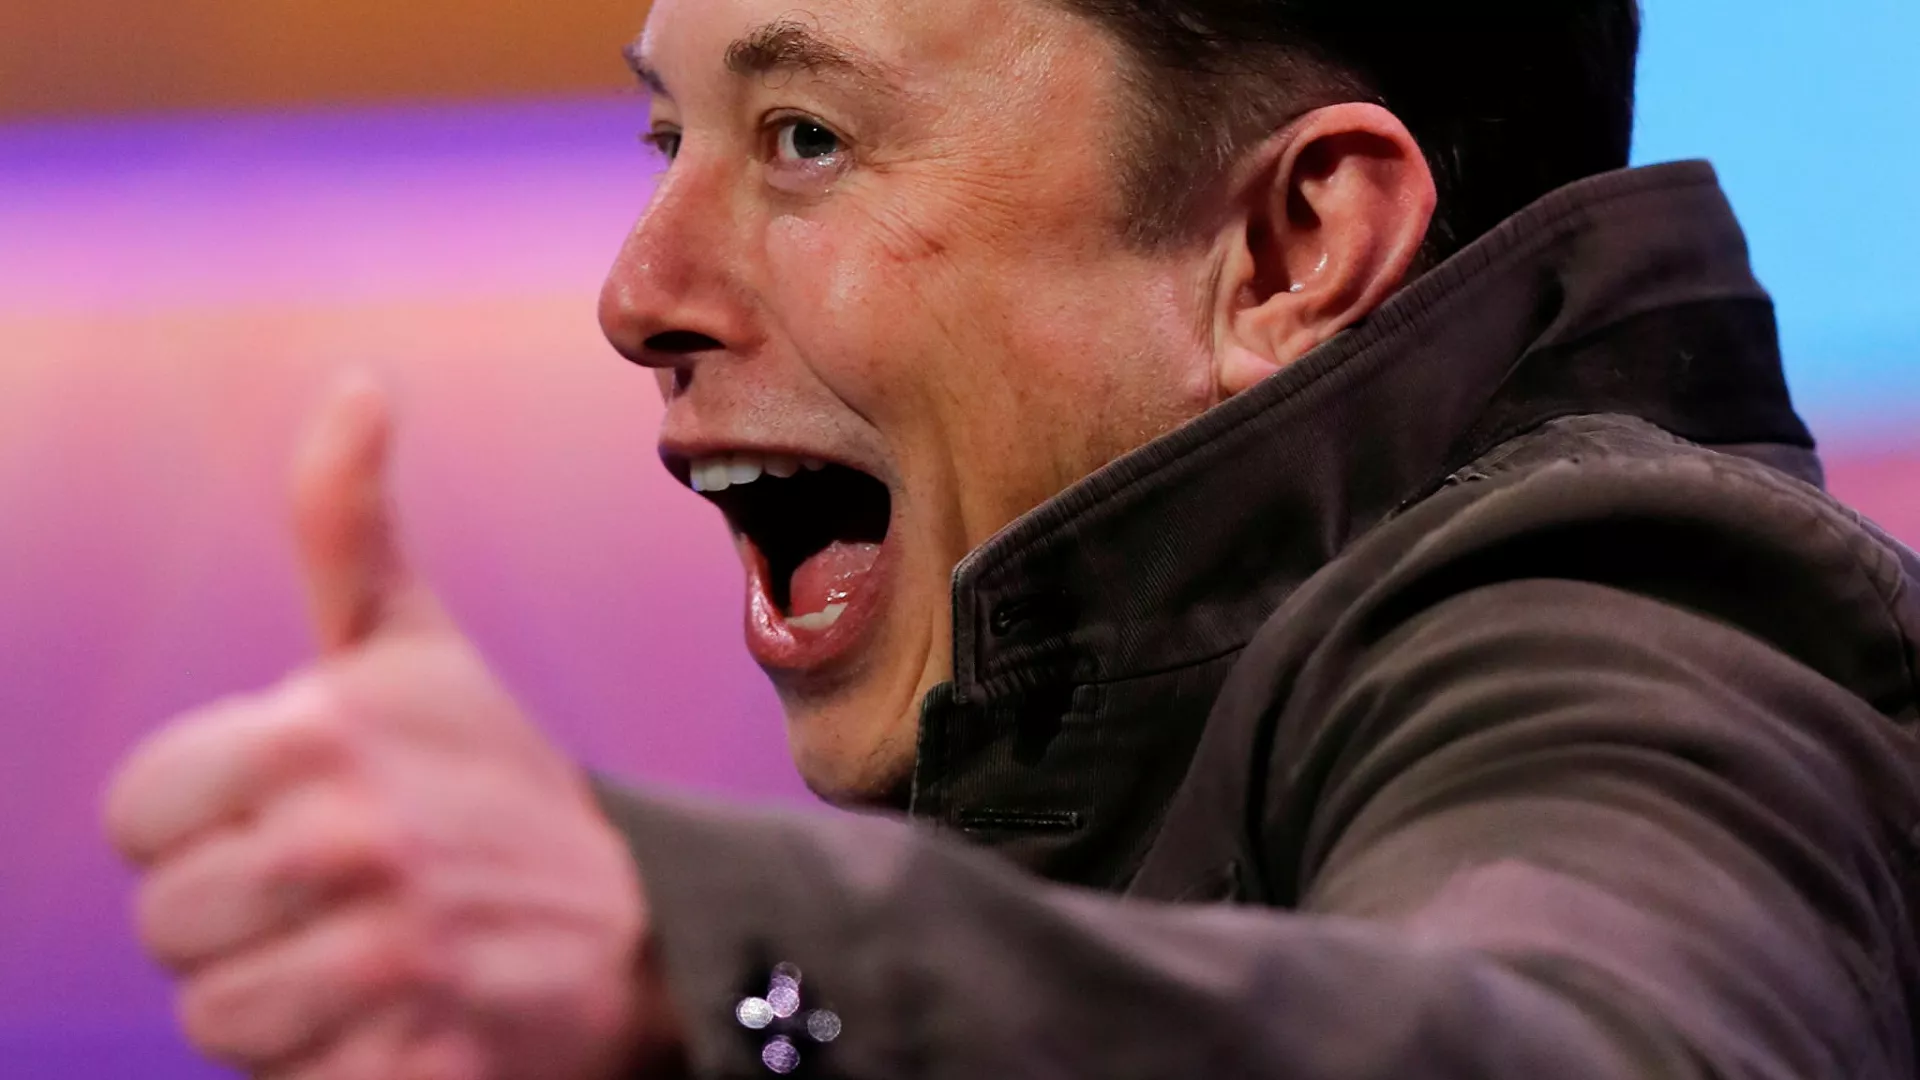 Elon Musk's SpaceX To Hire In India As Starlink Aims To Give Rural Areas High-Speed Internet